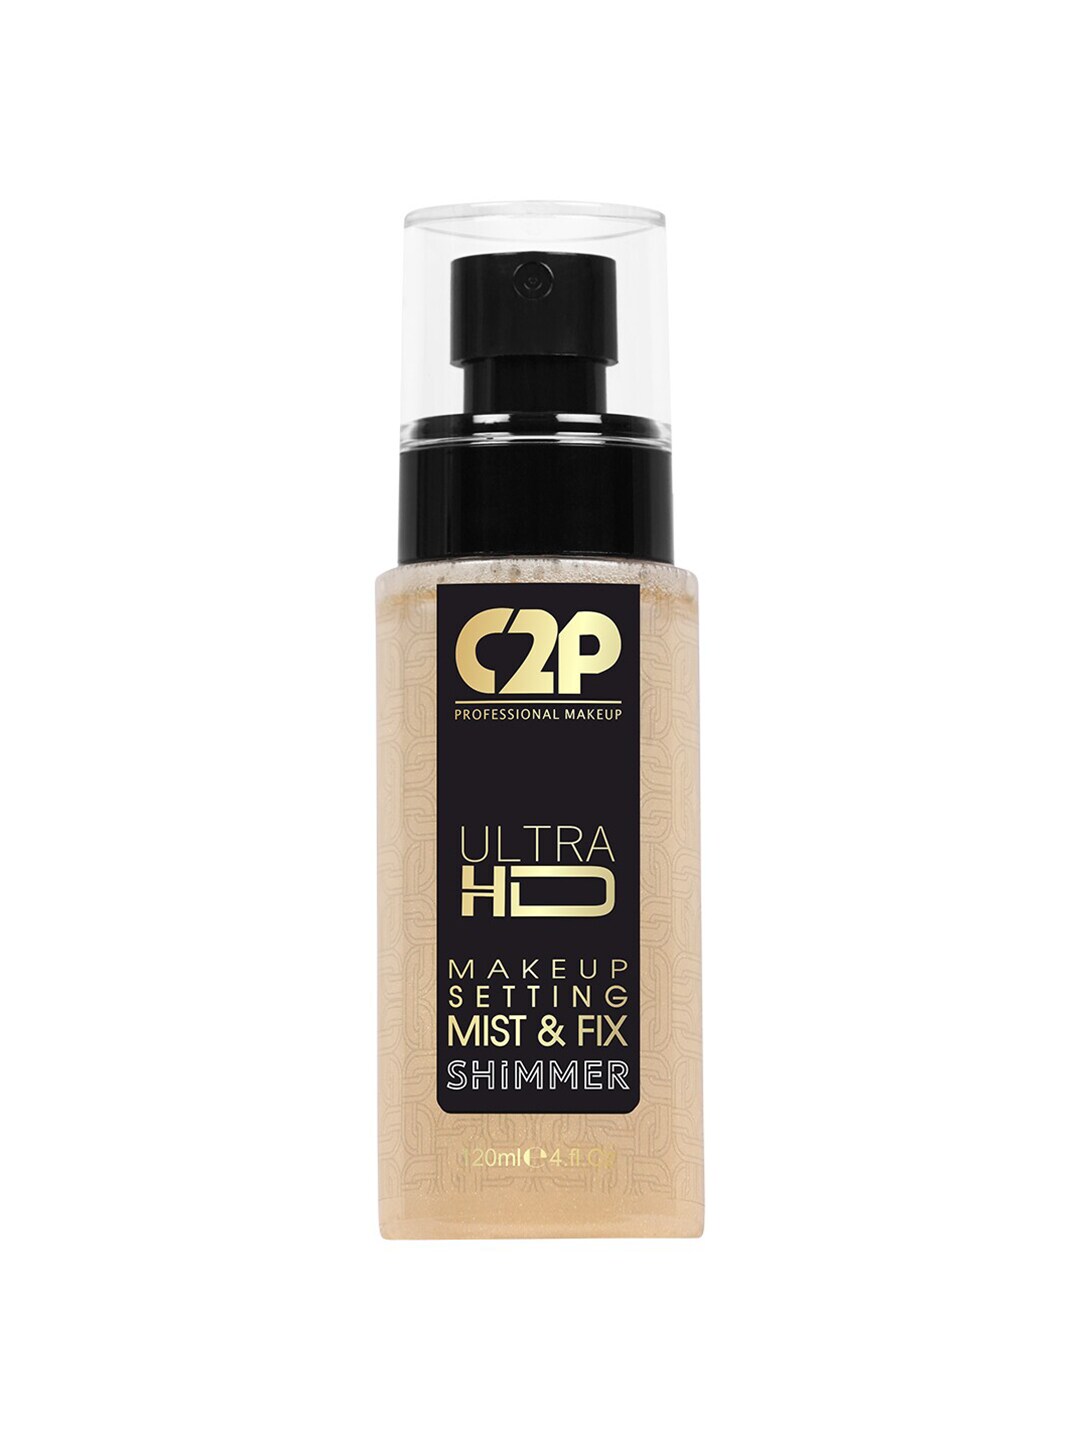 C2P PROFESSIONAL MAKEUP Ultra HD Makeup Setting Mist & Fix - Shimmer - Champagne 04 Price in India